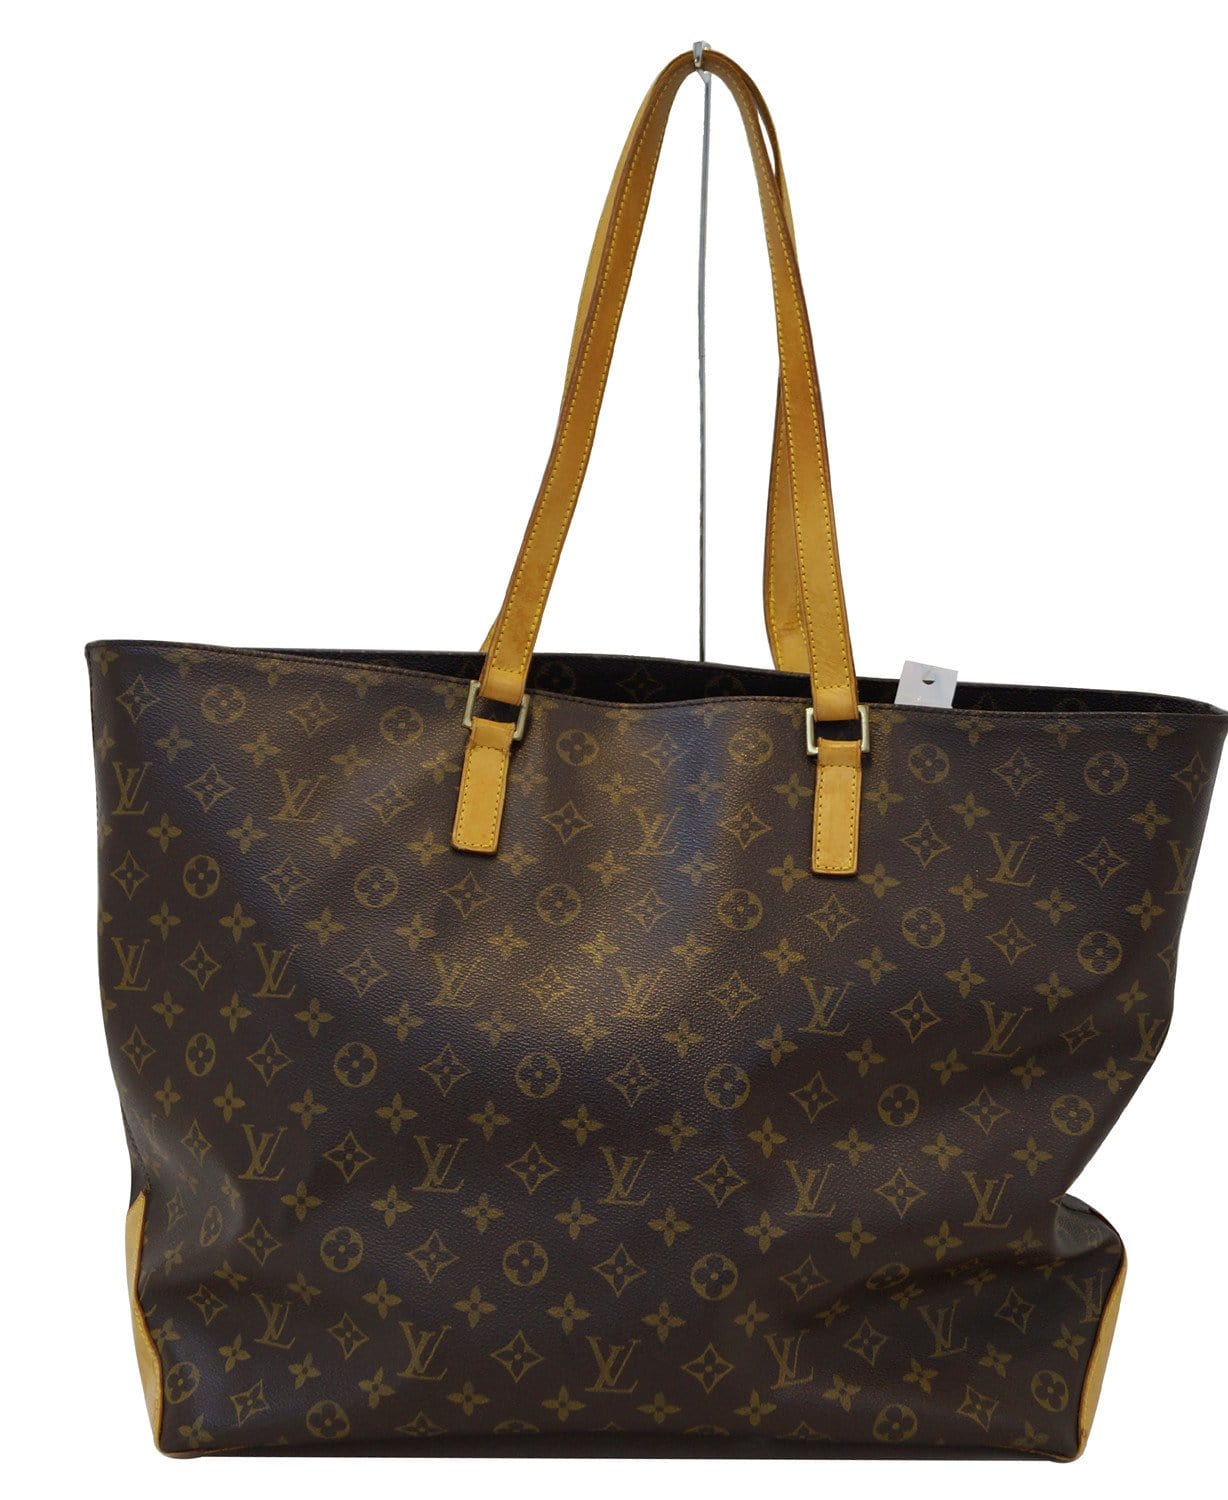 15 Chic Discontinued Louis Vuitton Bags For A Vintage Look